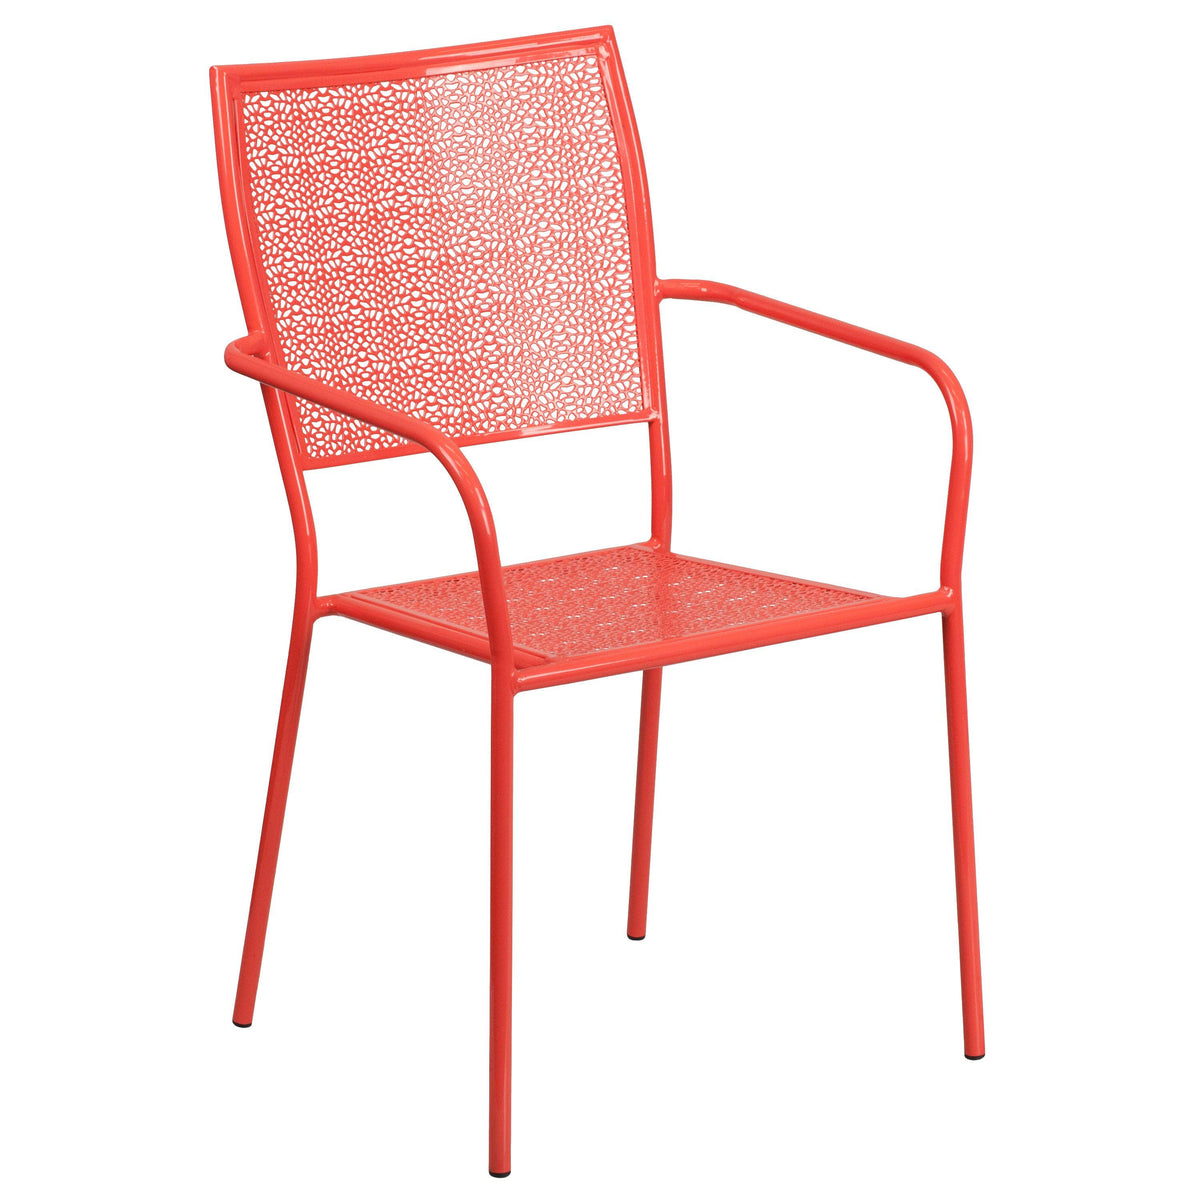 Coral |#| 30inch Round Coral Indoor-Outdoor Steel Folding Patio Table Set with 2 Chairs